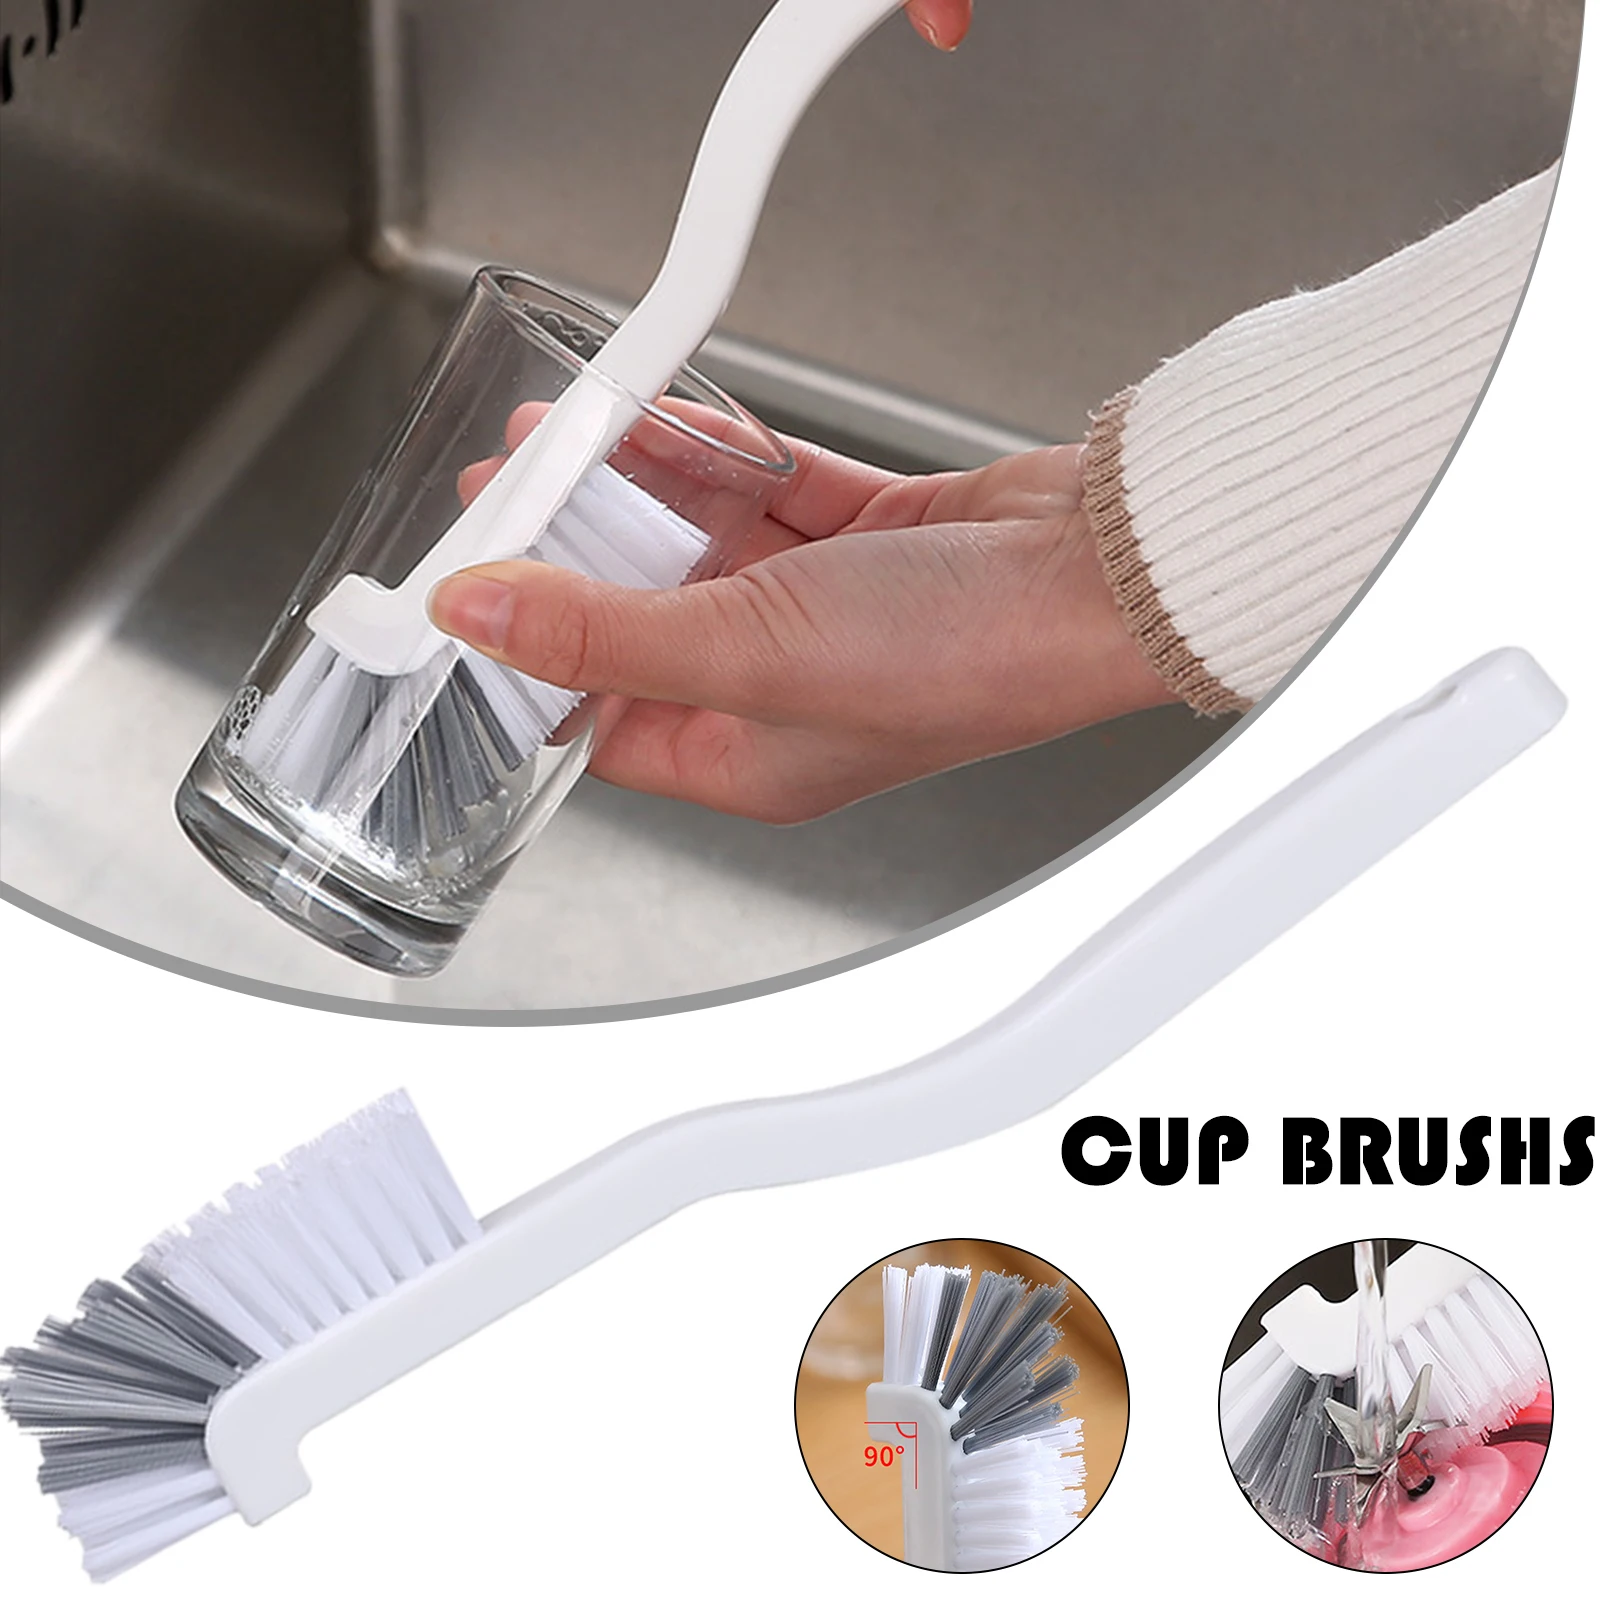 2 Pcs Cleaning Brush Small Scrub Brush for Cleaning Sink Scrub